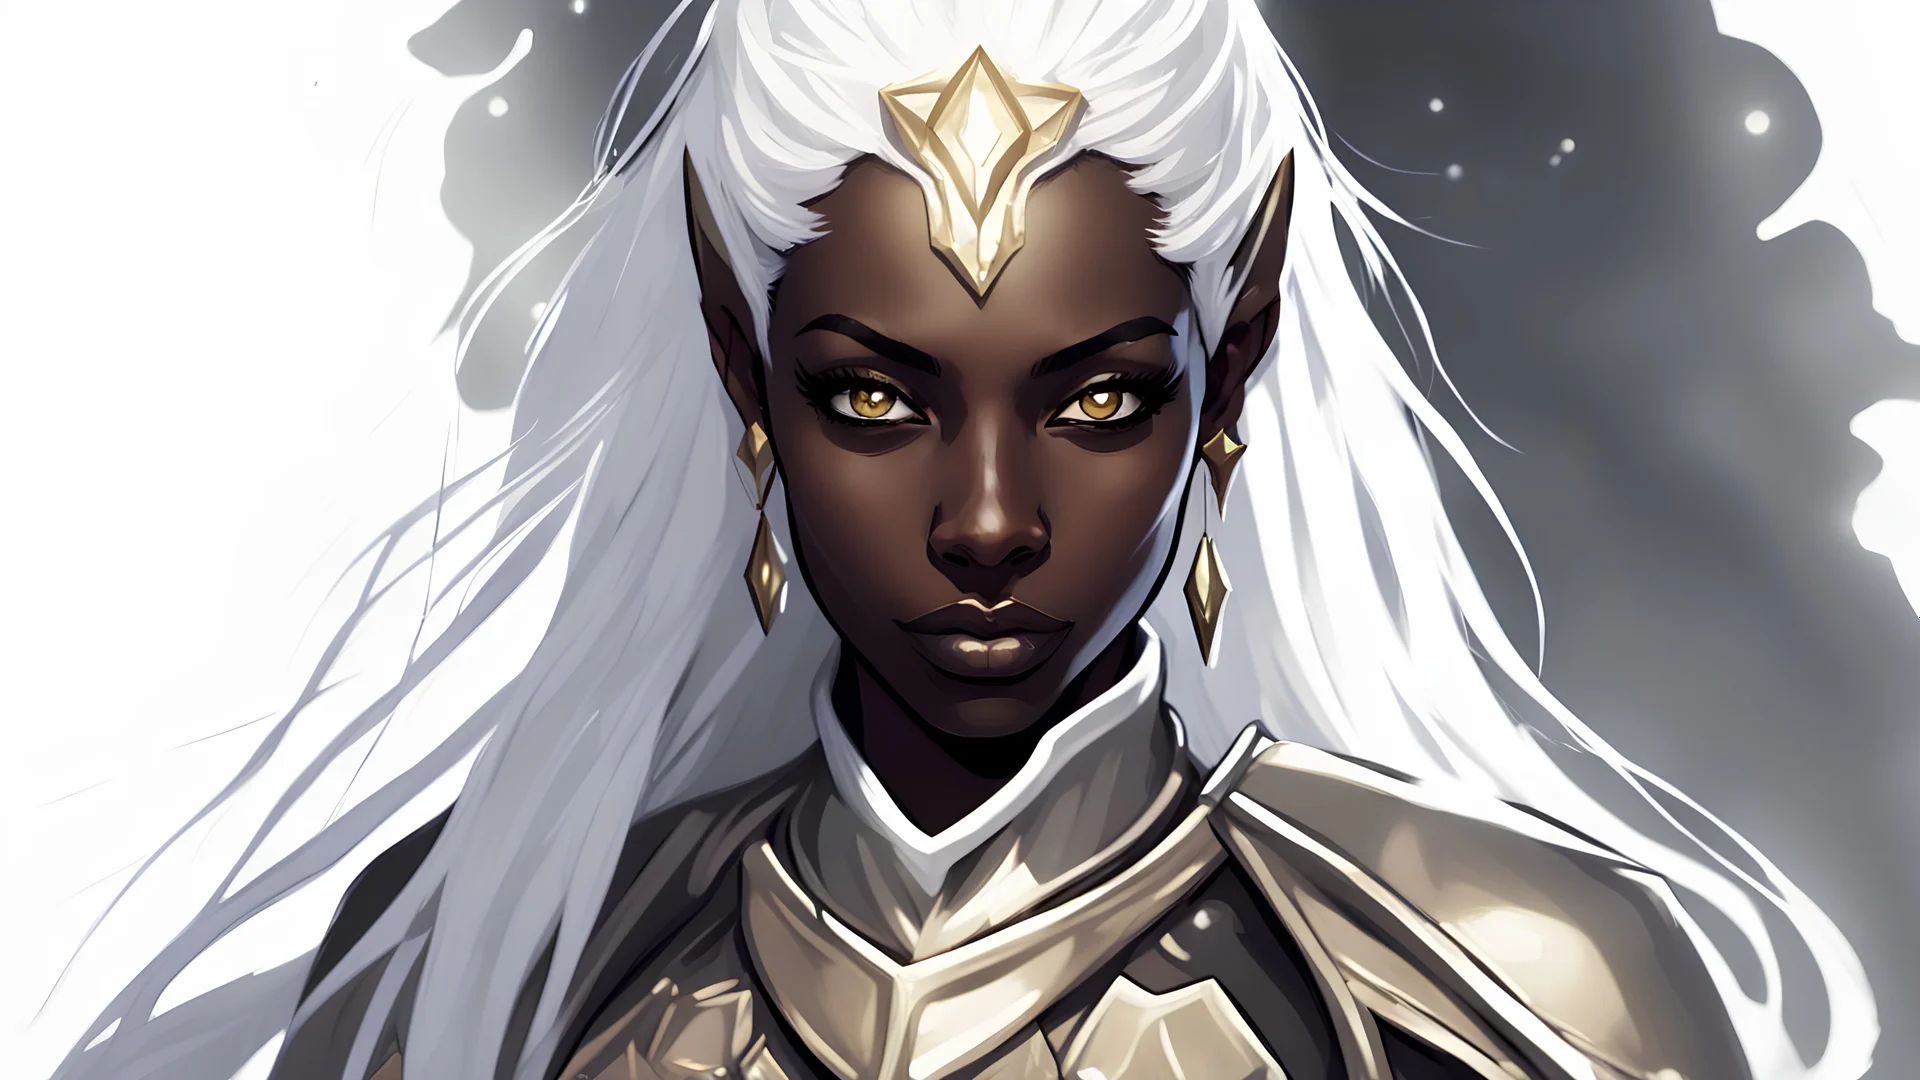 Generate a dungeons and dragons character portrait of the face of a female cleric of peace drow with dark skin and with black, white golden cloths inspired by the sentinels of light from leagueof legends. She has white hair and glowing eyes and is surrounded by holy light